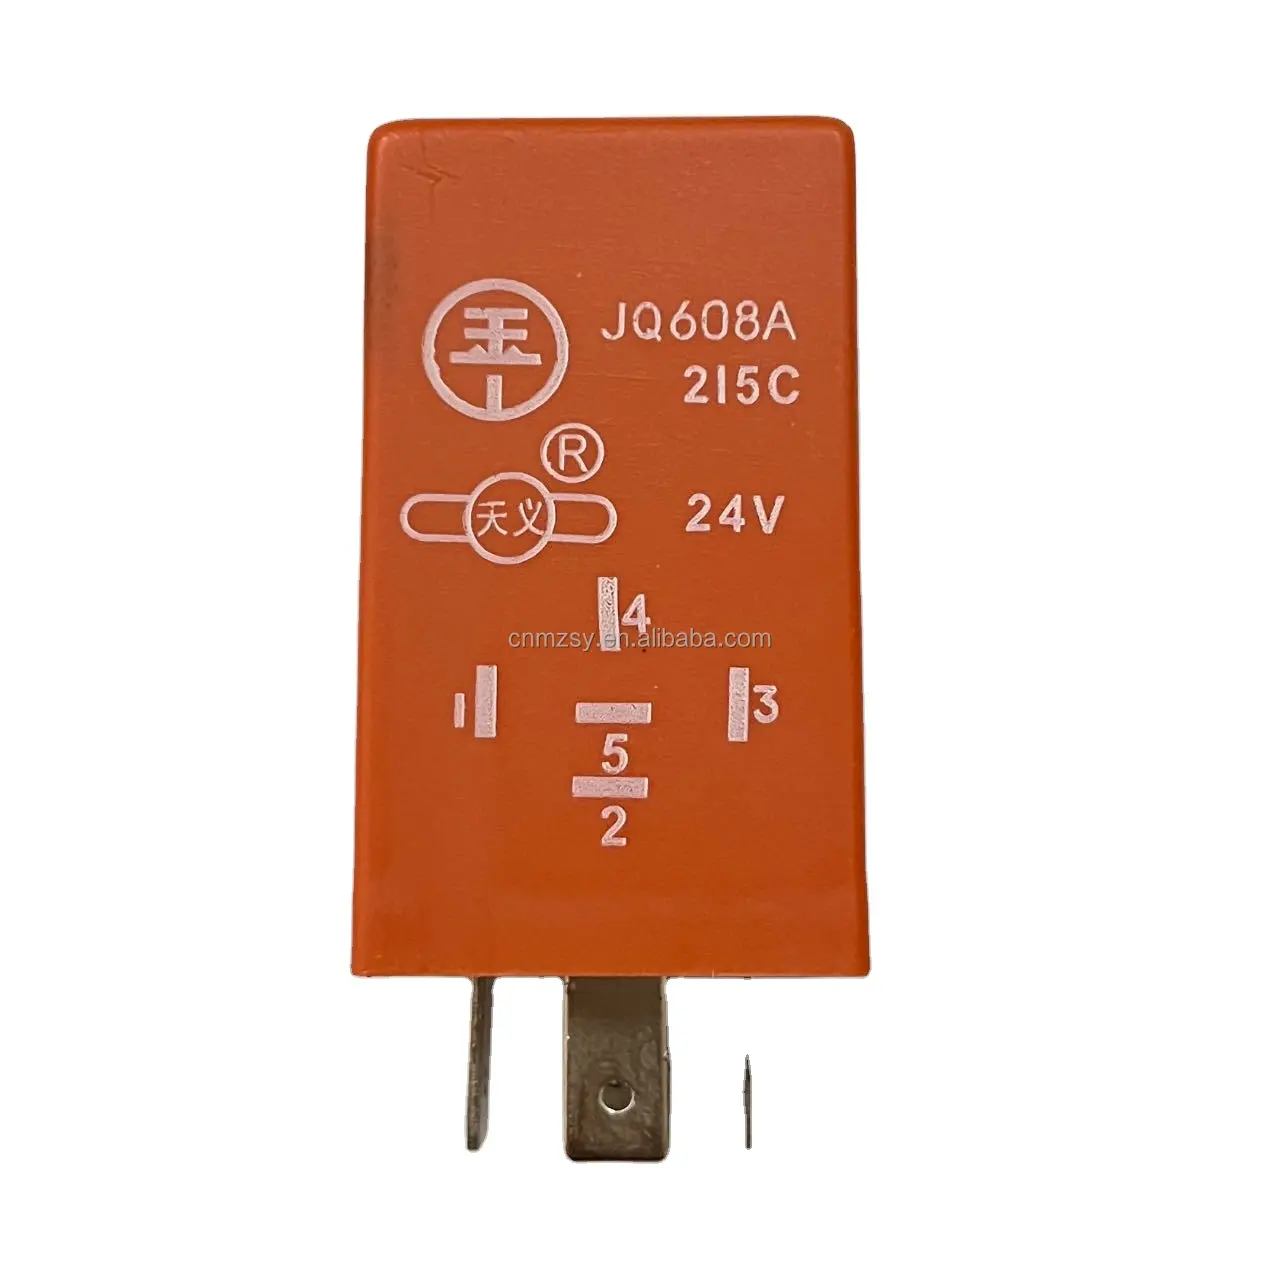 High quality bus electrical parts 24V JQ608A relay for chinese bus